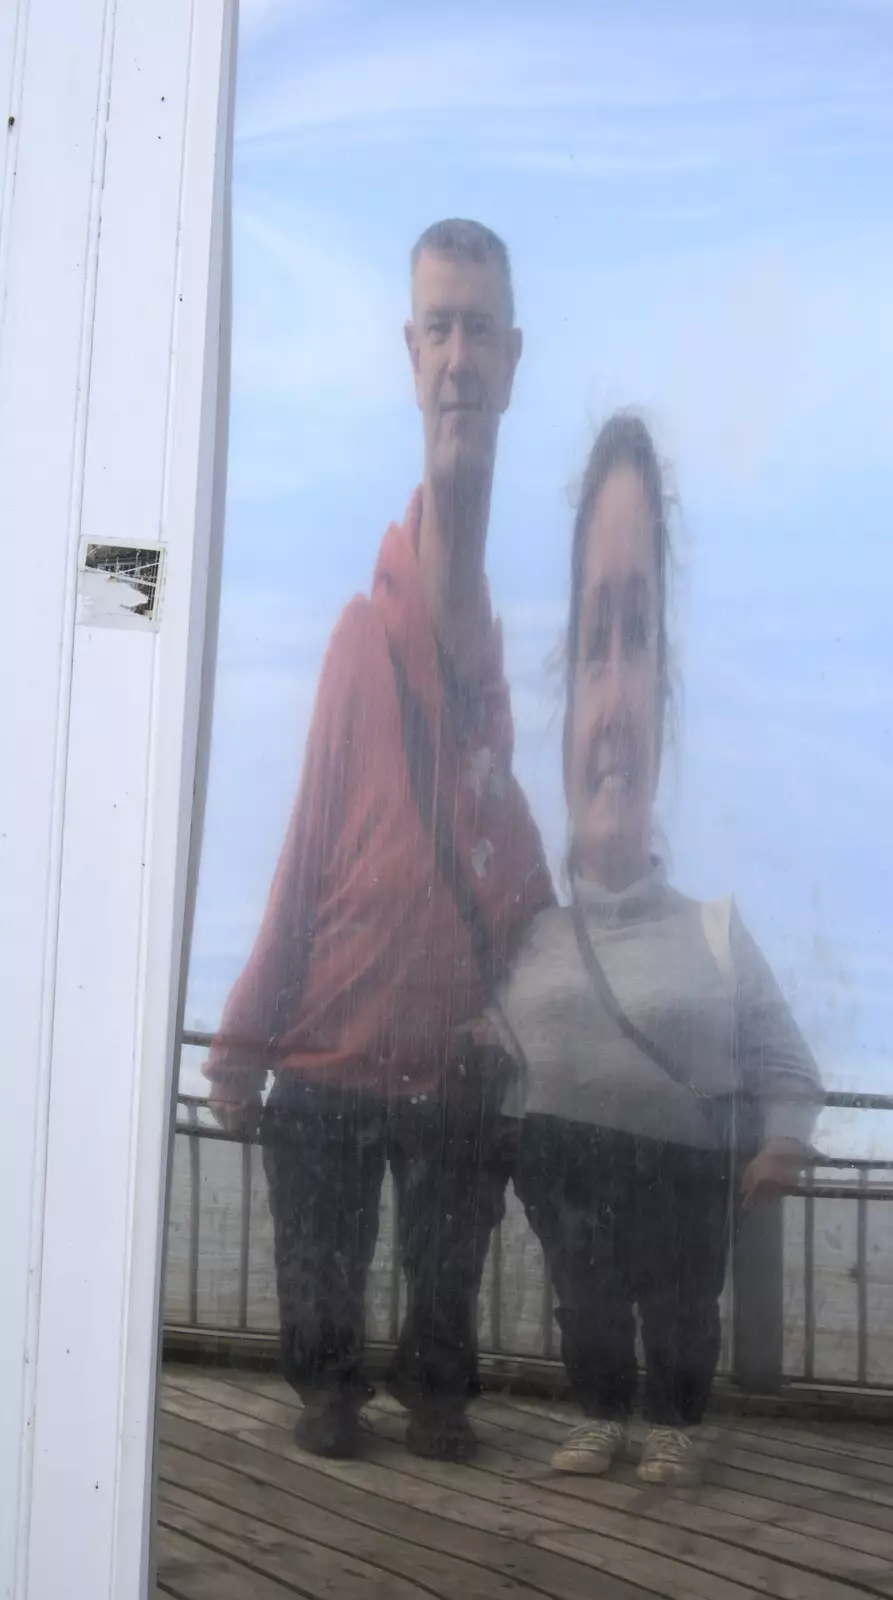 We try out some of the comedy mirrors, from The Waverley Paddle Steamer at Southwold Pier, Suffolk - 27th September 2023